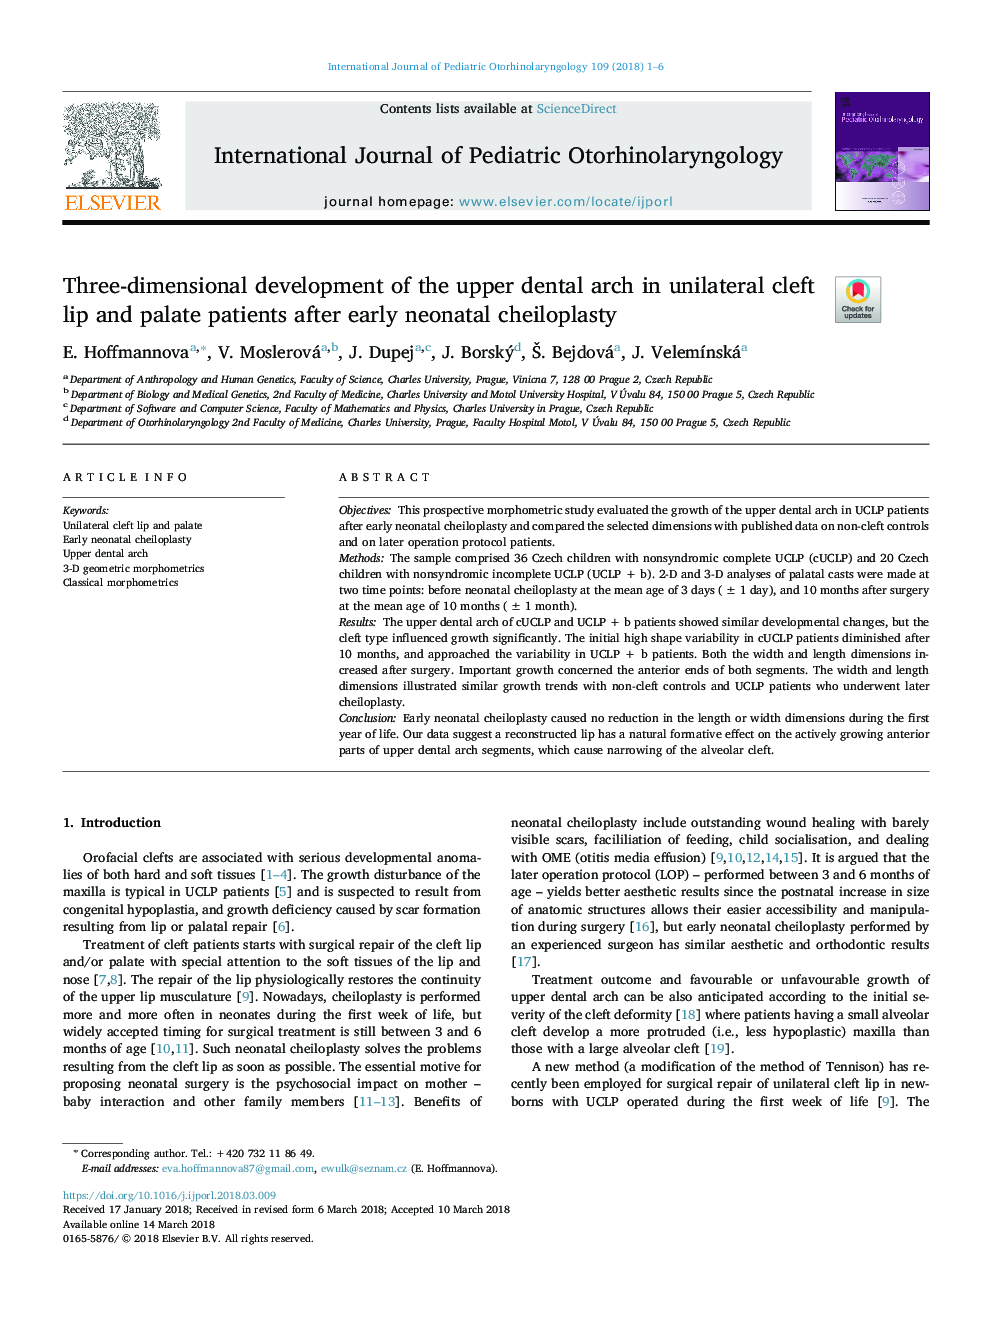 Three-dimensional development of the upper dental arch in unilateral cleft lip and palate patients after early neonatal cheiloplasty